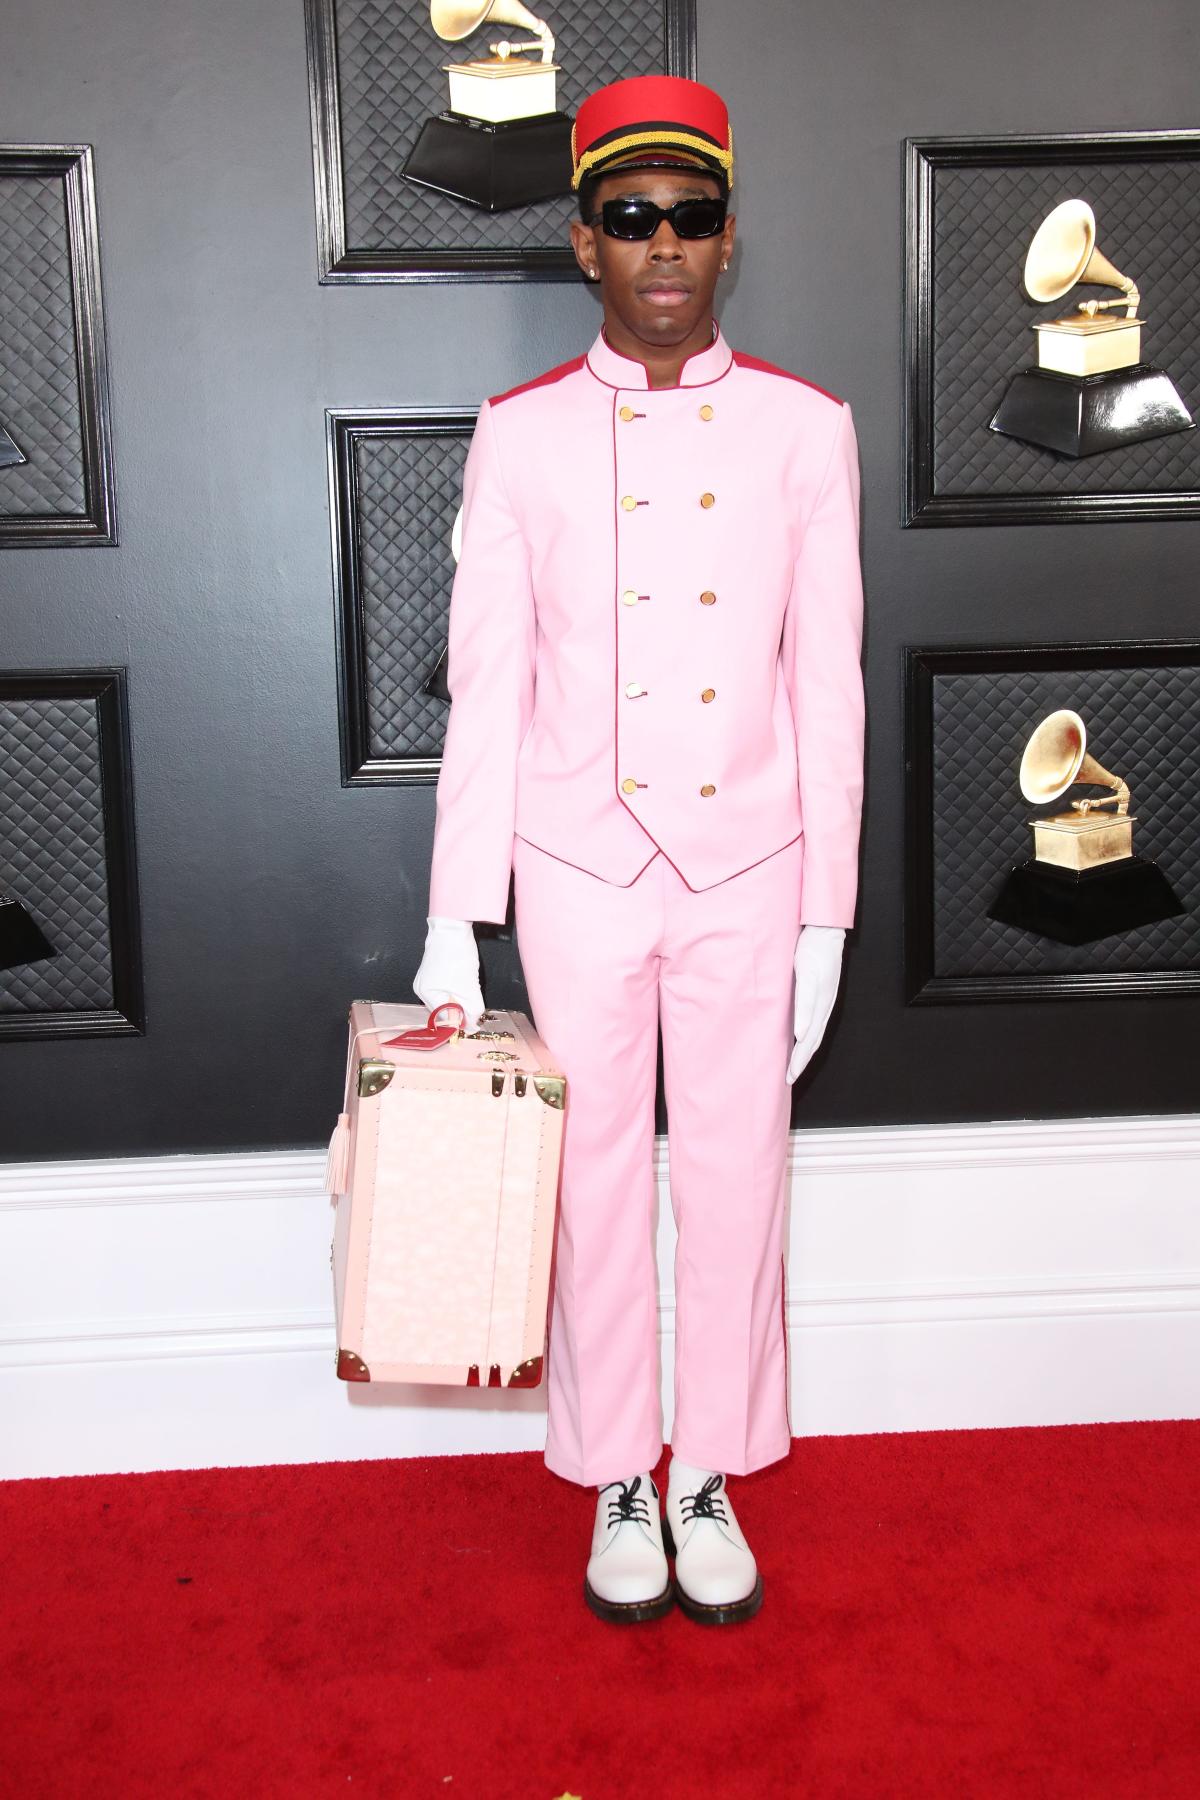 US rapper Tyler, the Creator's Louis Vuitton capsule collection is